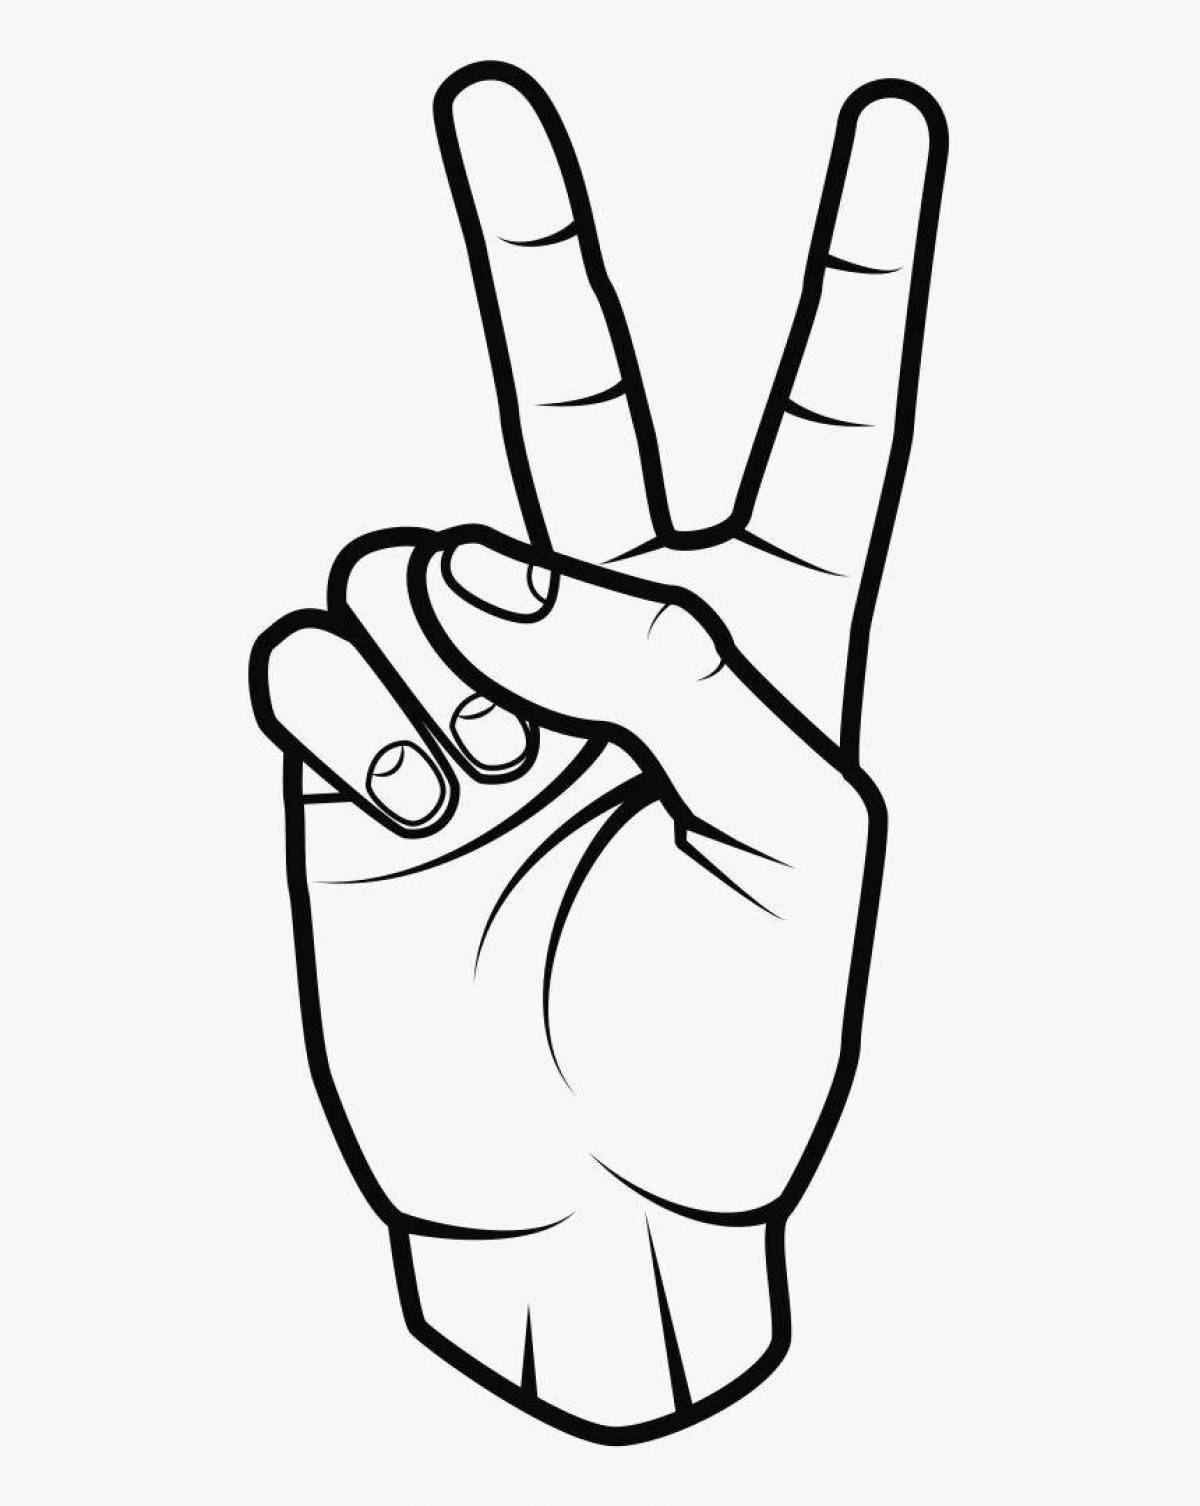 Coloring hand thing wednesday coloring page